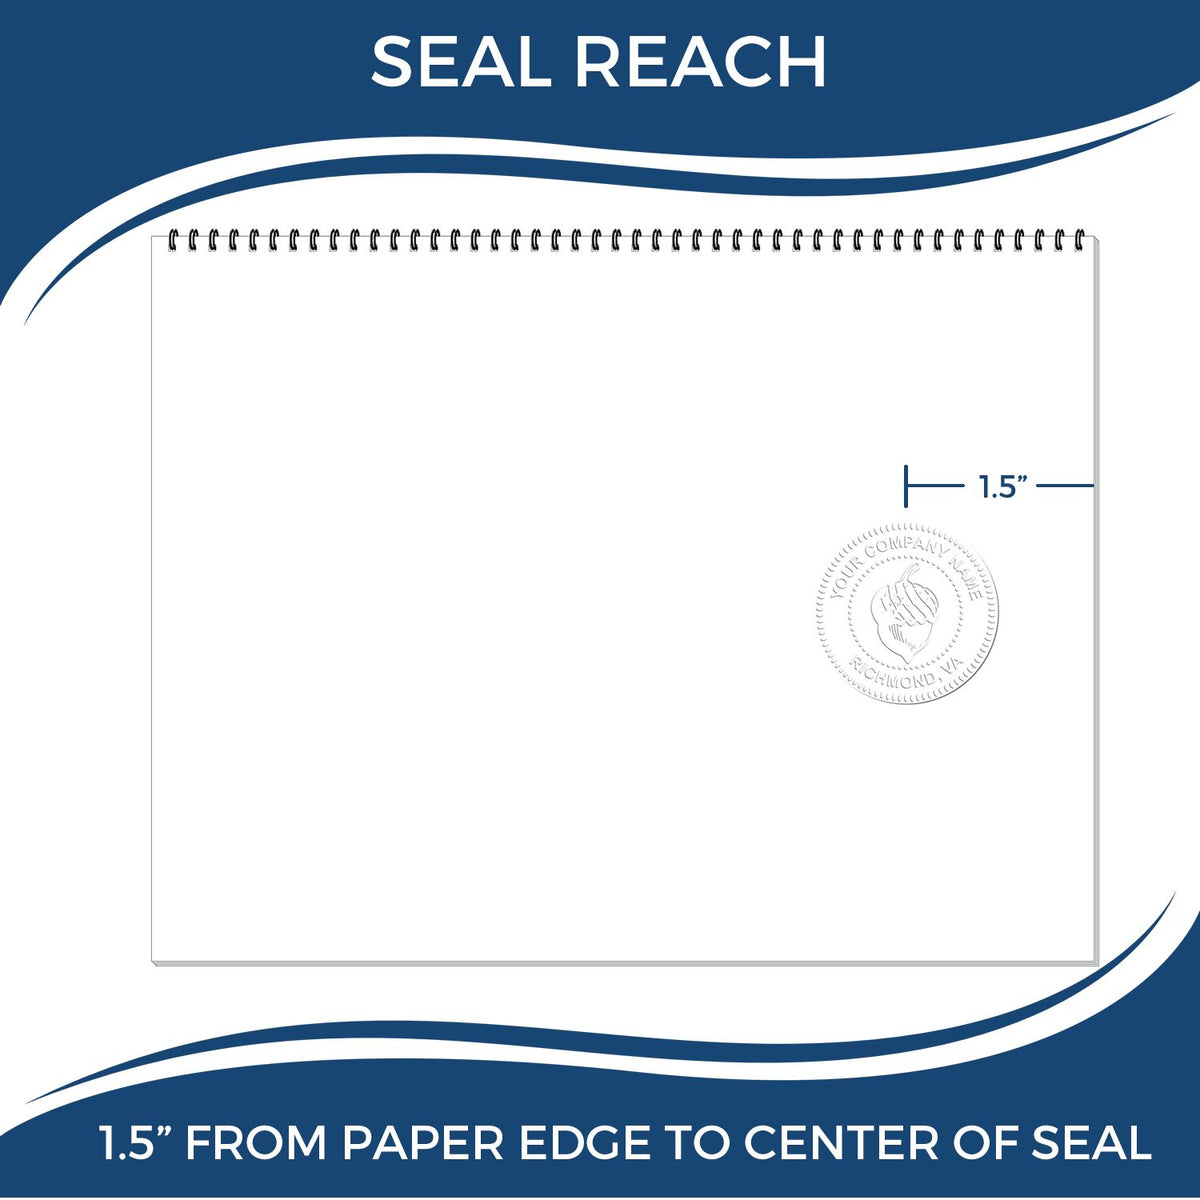 An infographic showing the seal reach which is represented by a ruler and a miniature seal image of the Soft Pocket Illinois Landscape Architect Embosser